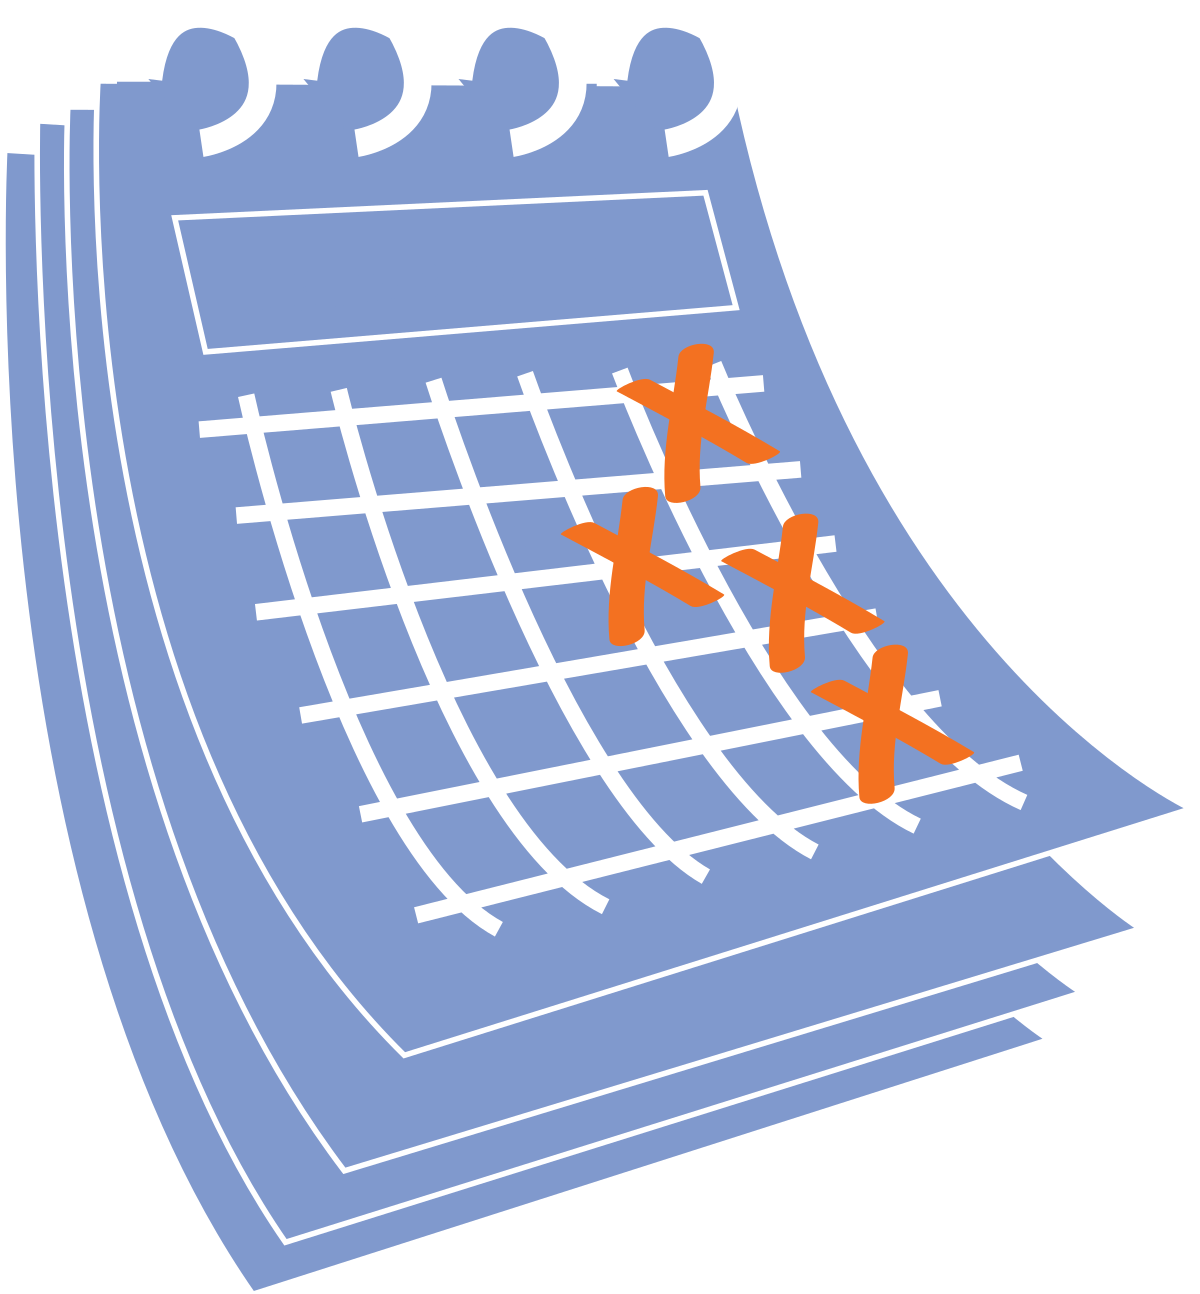 Calendar with crossed-out deadlines